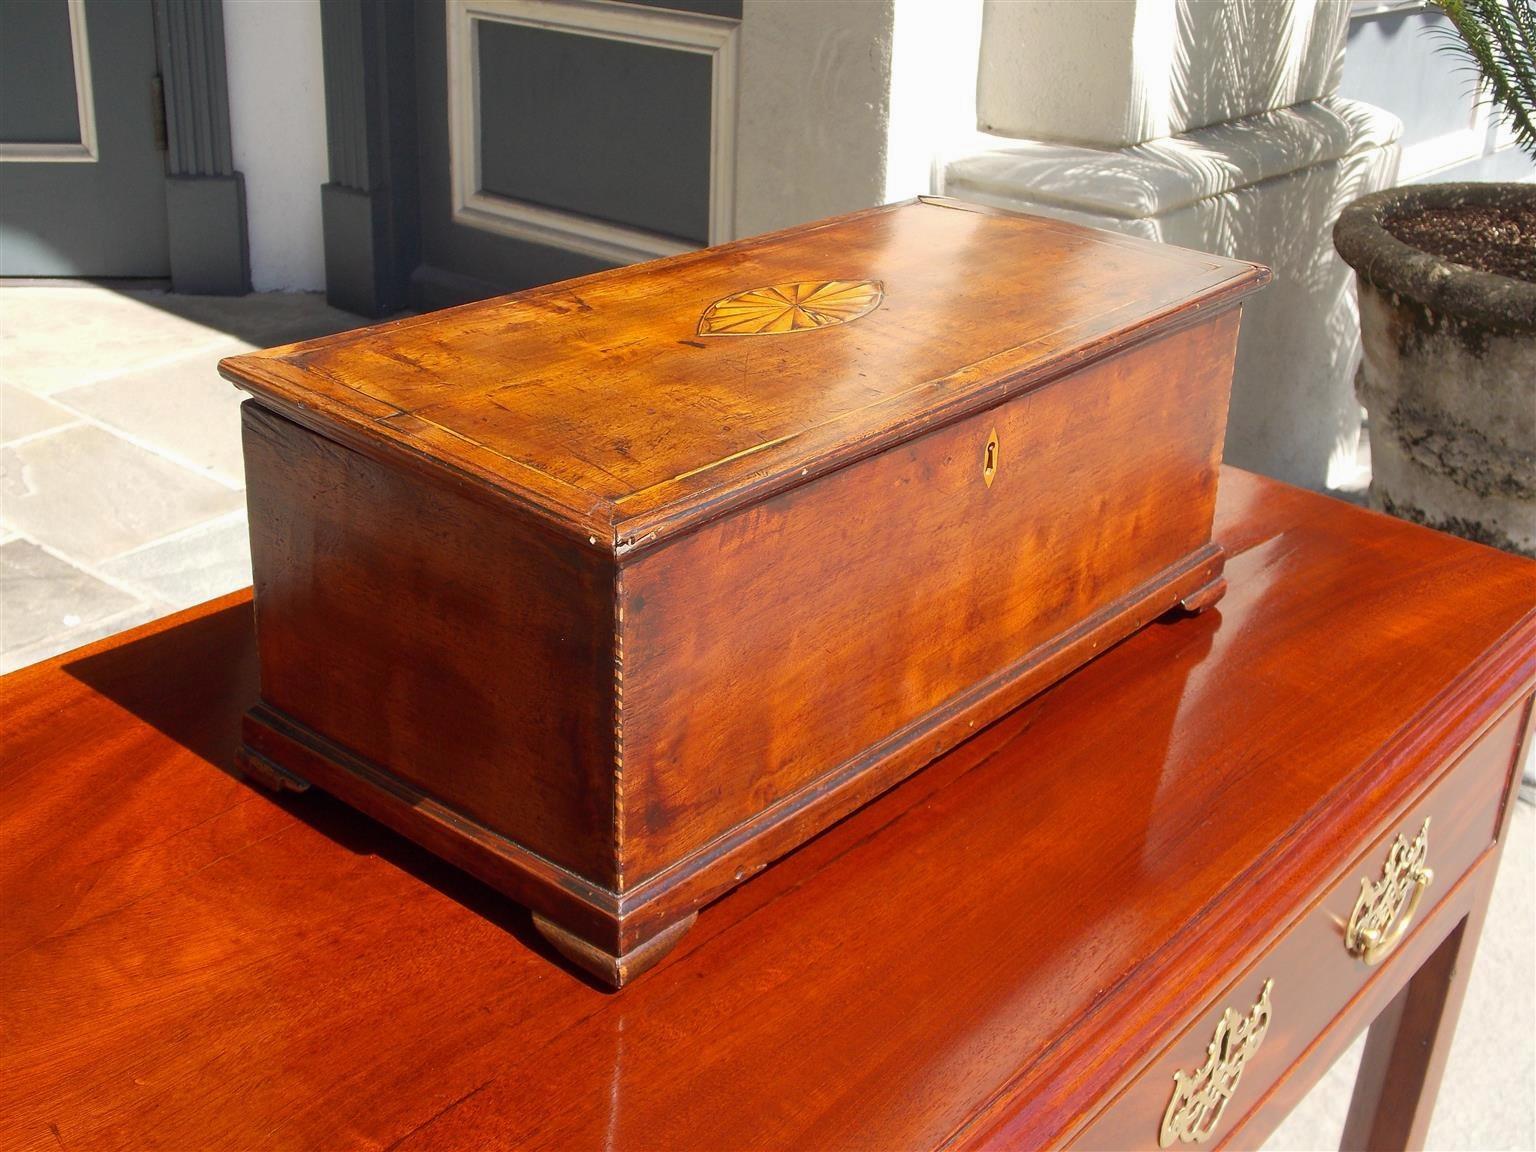 Chippendale American Walnut Satinwood Inlaid Valuables Box with Original Feet, Circa 1780 For Sale